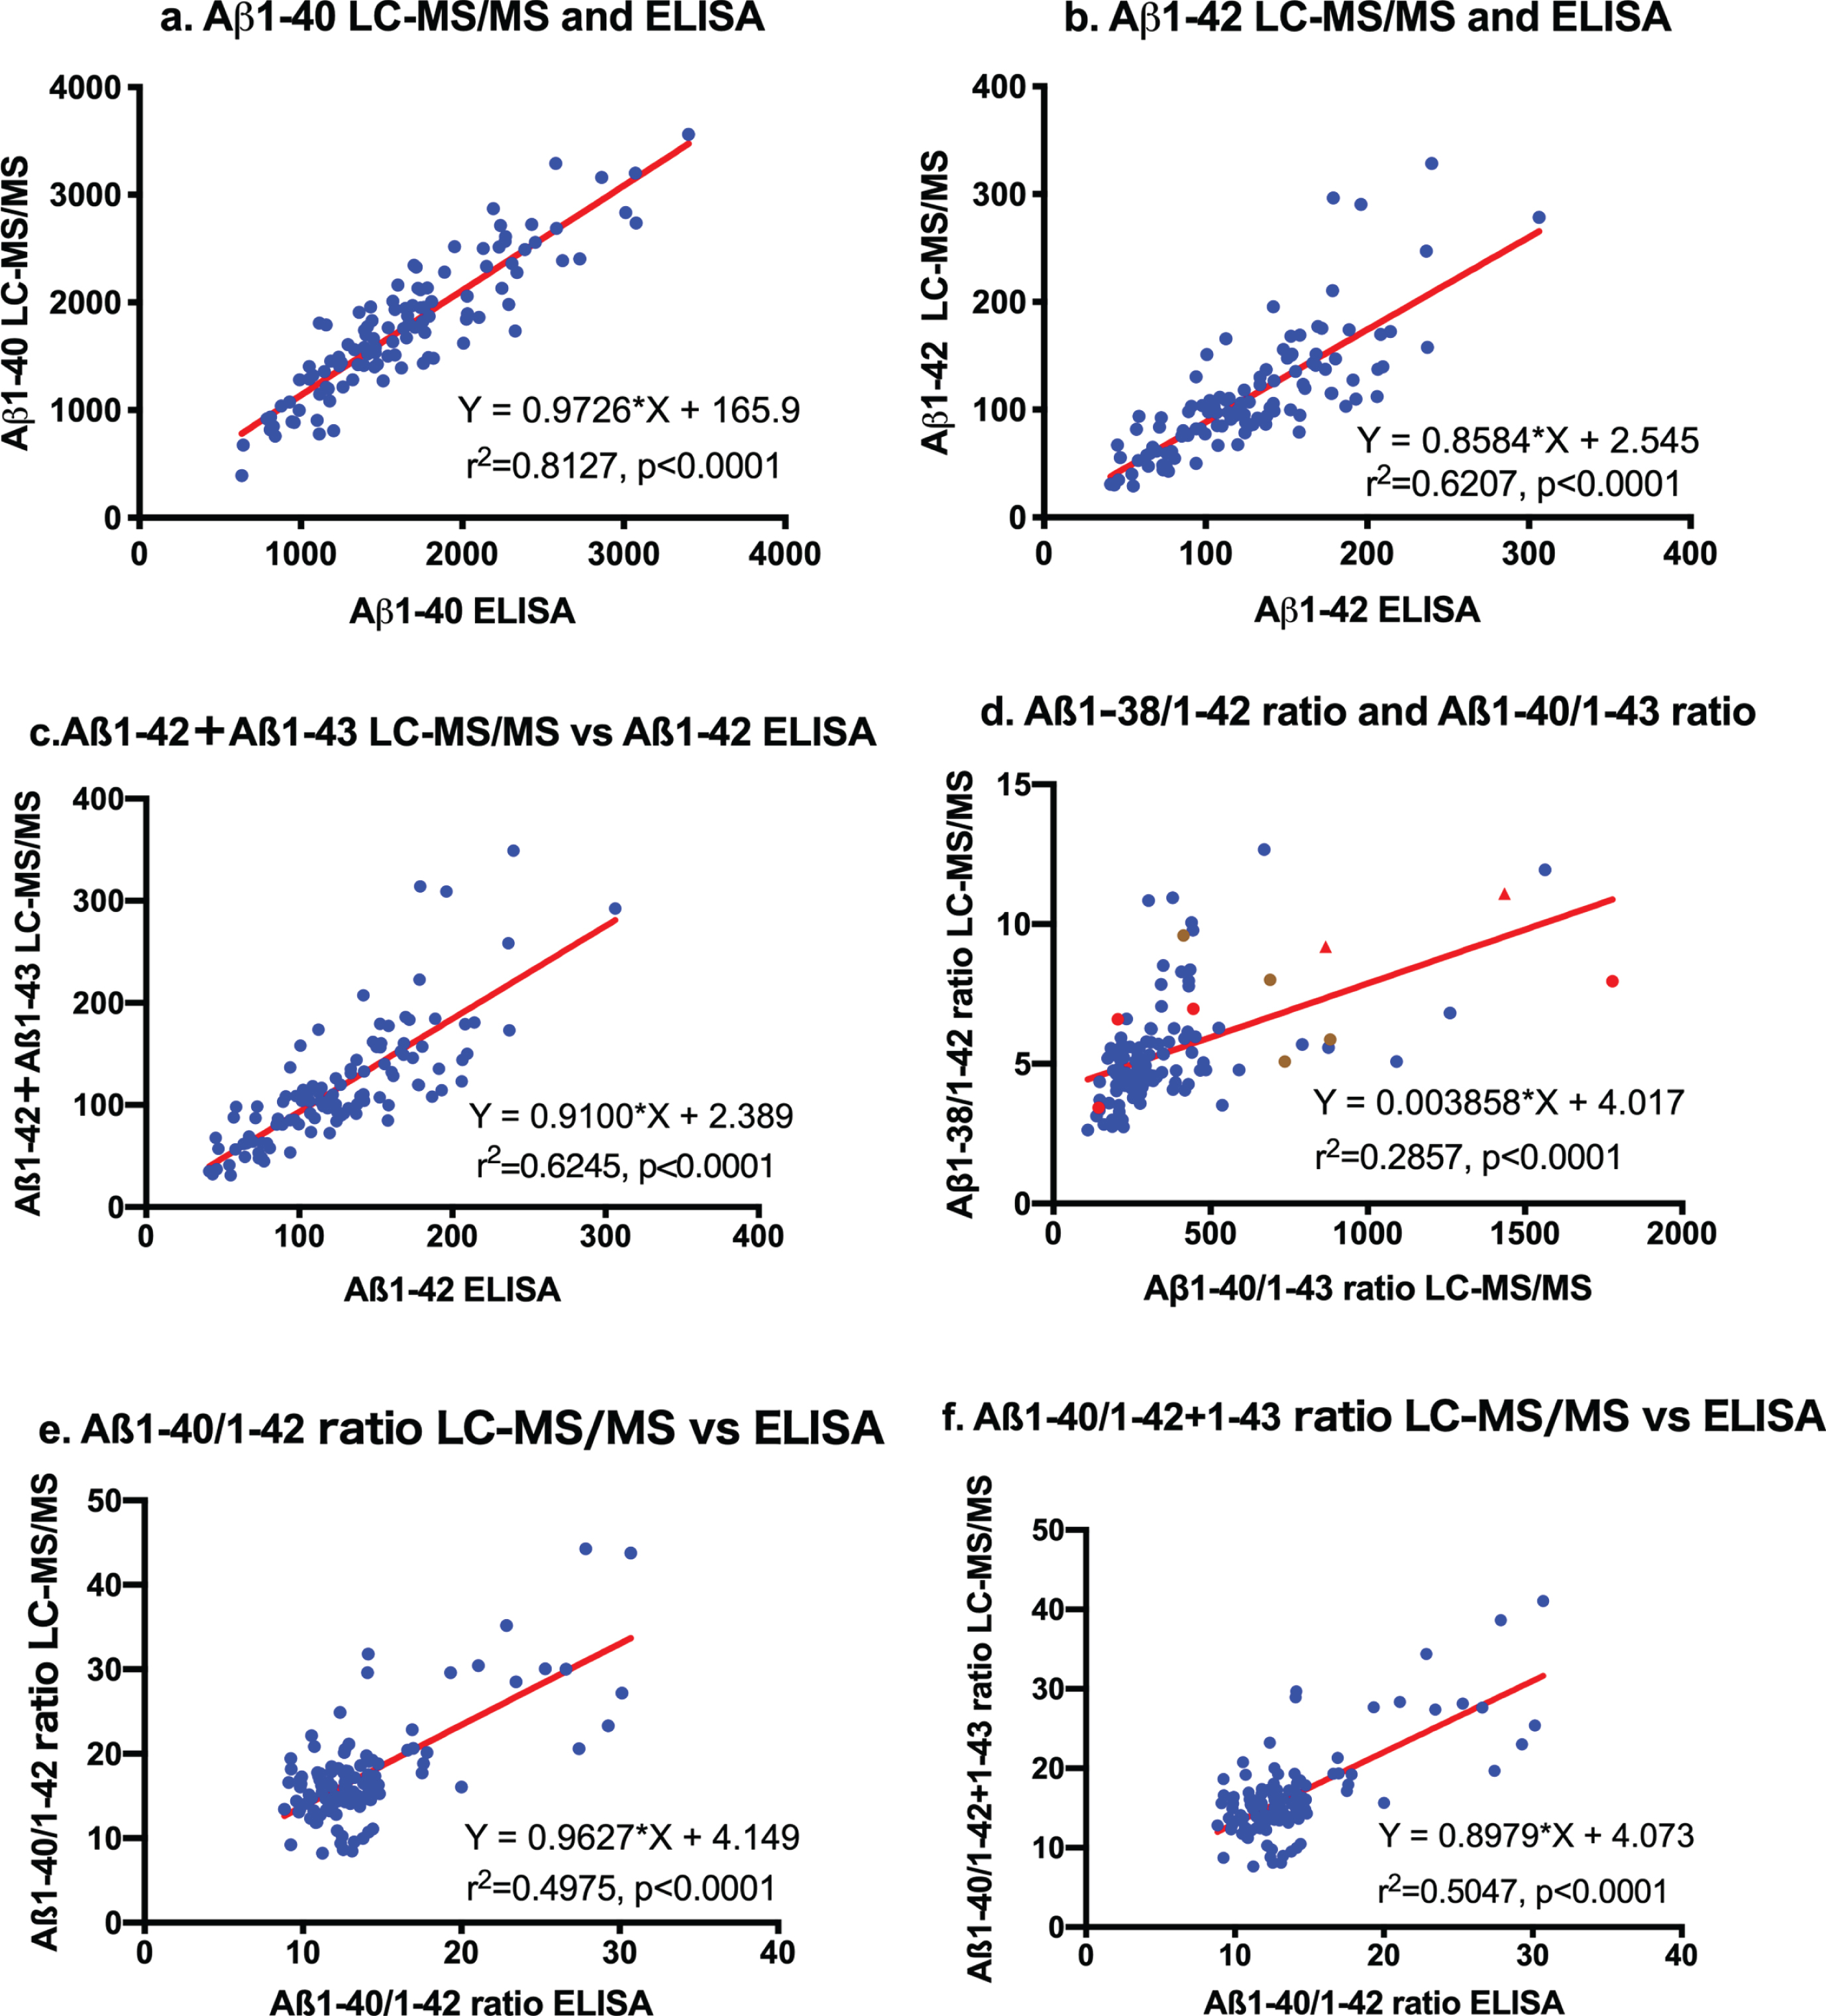 Correlation between LC-MS/MS and ELISA. Aβ1-40, Aβ1-42, and Aβ1-42 + Aβ1-43 values measured by LC-MS/MS were strongly correlated with those obtained by ELISA (a: Y = 0.9726*X + 165.9, r2 = 0.8127, p < 0.0001 for Aβ1-40 values; b: Y = 0.8584*X+2.545, r2 = 0.6207, p < 0.0001 for Aβ1-42; and c: comparisons between Aβ1-42 + Aβ1-43 levels by LC-MS/MS and Aβ1-42 values by ELISA: Y = 0.9100*X + 2.389, r2 = 0.6245, p < 0.0001). The regression curve between the Aβ1-38/1-42 ratio and Aβ1-40/Aβ1-43 ratio measured by LC-MS/MS was almost constant. The ratios of 8 out of 10 AD patients were outside the linear regression curve (d: Red circles  represent sporadic ADD, red triangles  represent sporadic ADMCI, brown circles  represent familial AD). Correlation analysis between measured levels by LC-MS/MS and ELISA in Aβ1-40/Aβ1-42 and Aβ1-40/Aβ1-42 + Aβ1-43 showed close relationships, but most values were present in the leftmost regression curve (e and f).